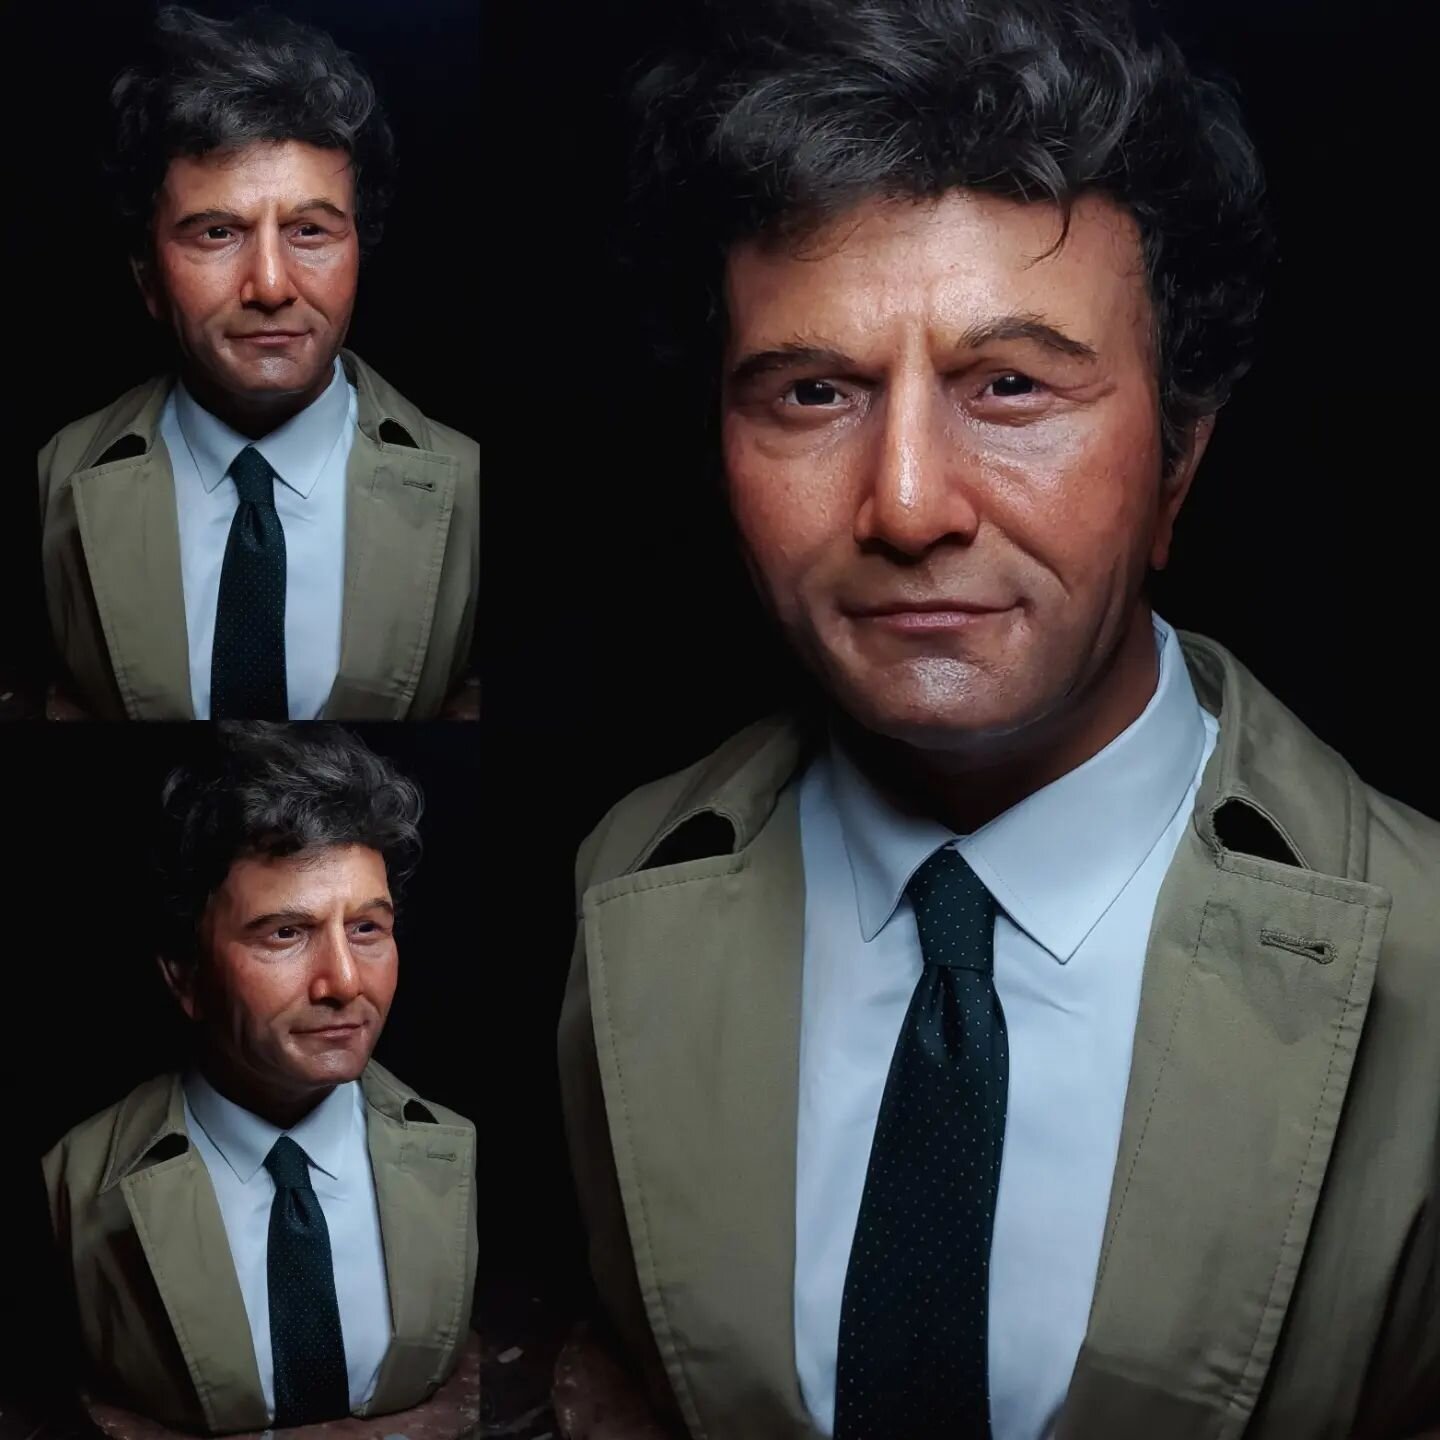 Made a bust of Columbo! This was originally made as a gift for my aunt, but now I want one. Columbo is awesome! 😊

#fx #specialfx #sculpture #sculpt #columbo #peterfalk #columbotv #peterfalkcolumbo #detective #nbcmysterymovie #tv #classictv #1970s #